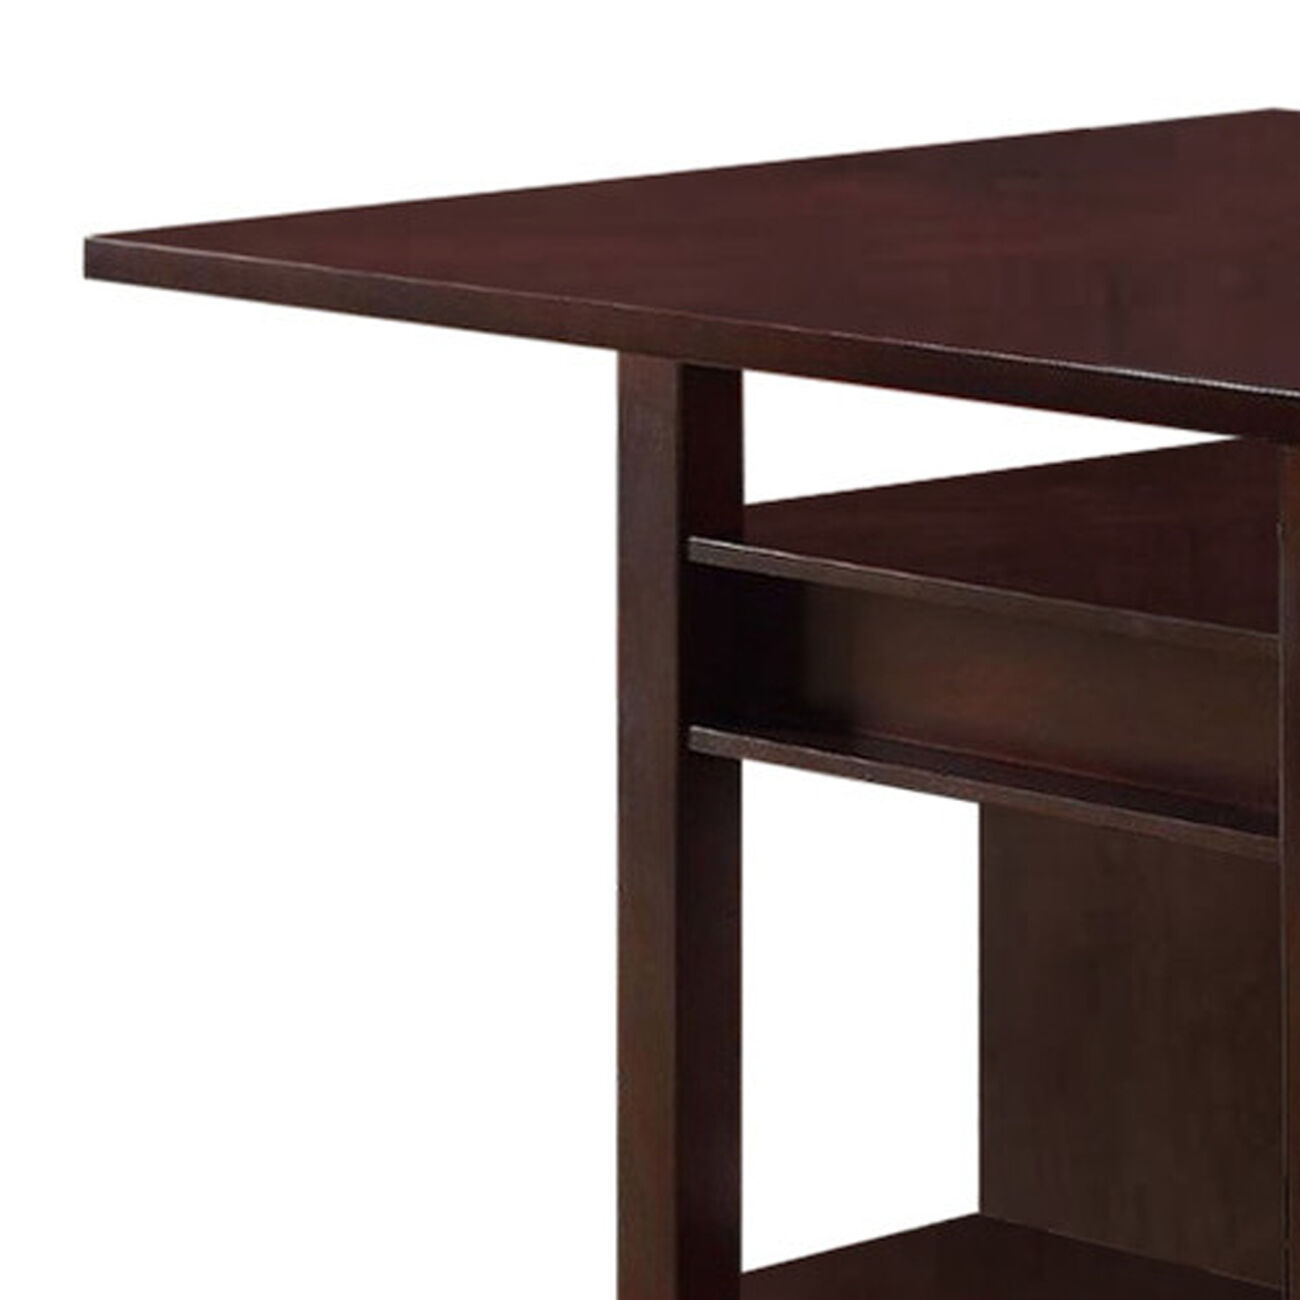 Wooden Counter Height Table With Storage Shelves, Brown